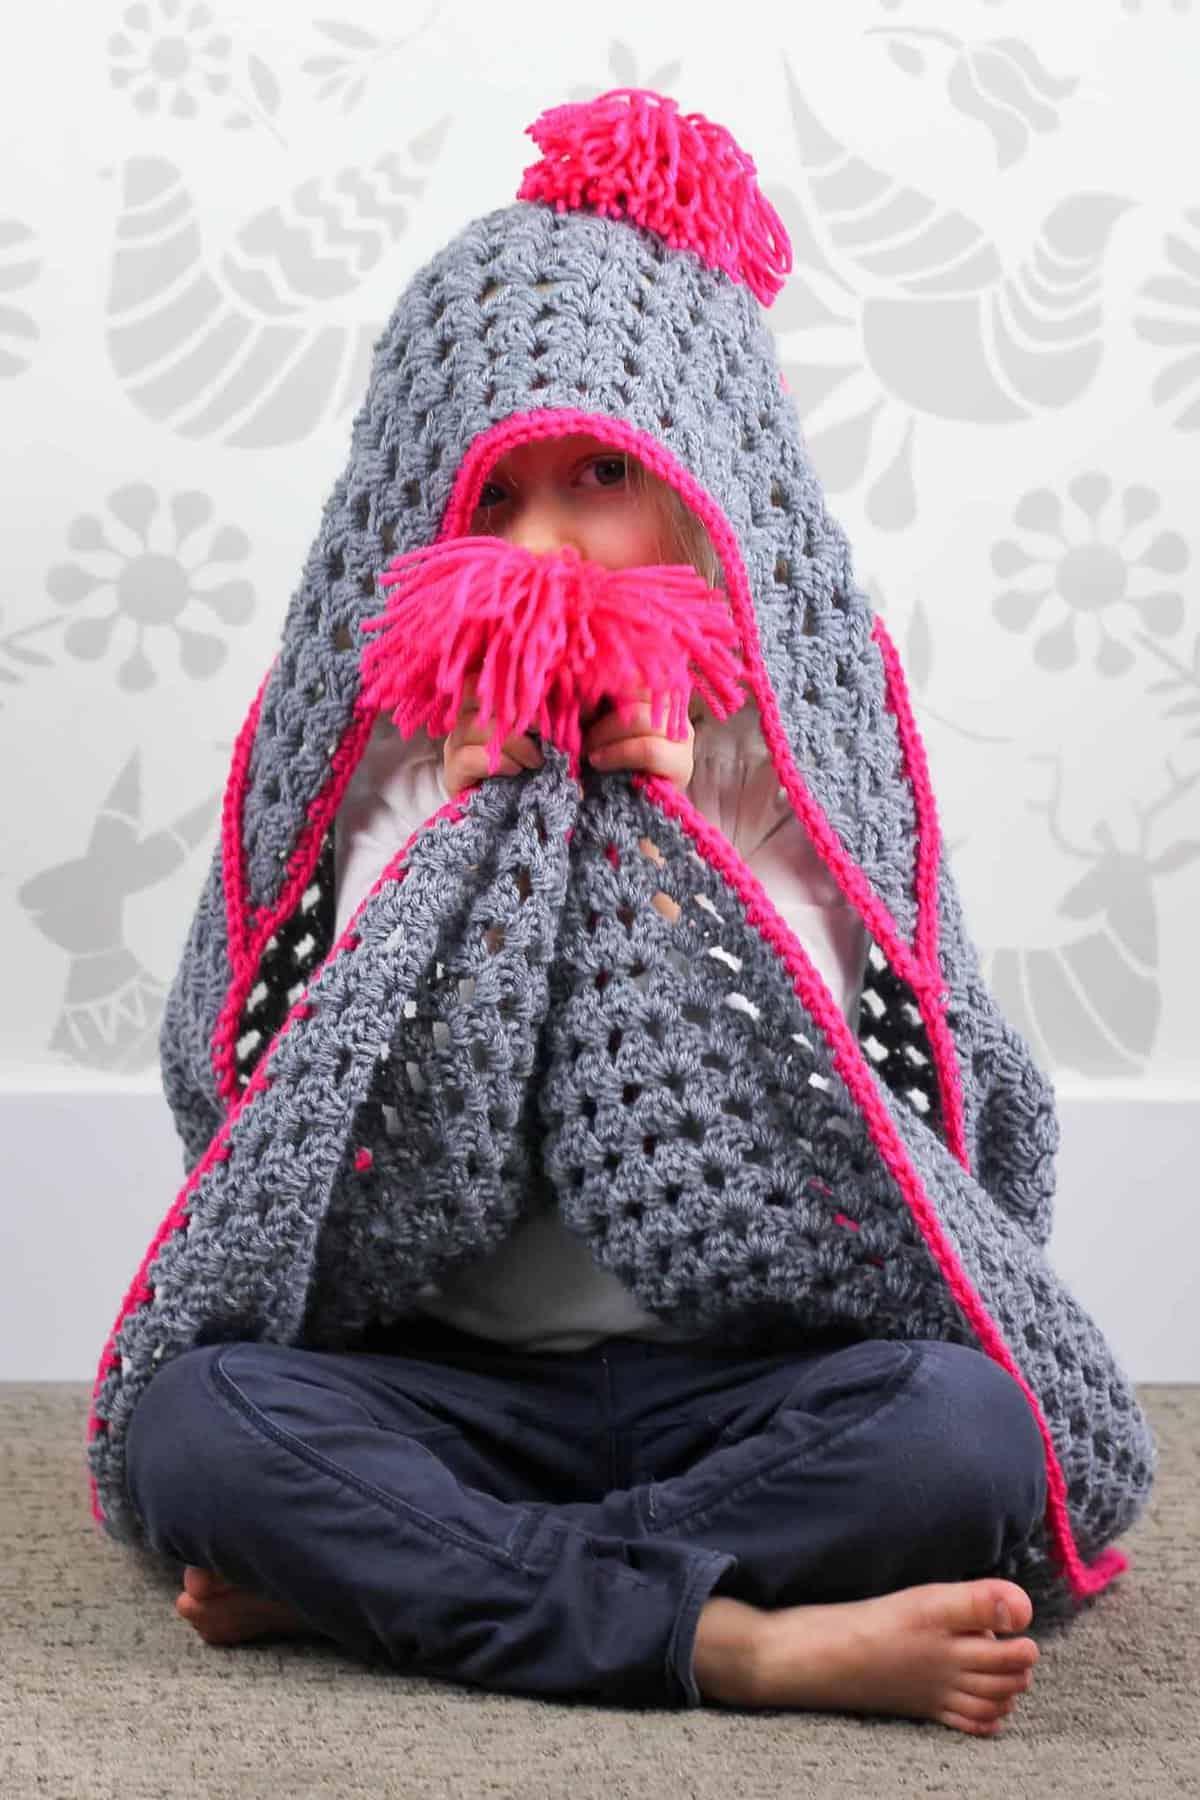 Based on a large granny square, the "Granny Gives Back" crochet hooded blanket pattern makes an easy and inexpensive project to donate to children's charities. The oversized hood and playful tassels will give any kid a safe, warm place to escape to. Click for the free pattern using Lion Brand Pound of Love yarn!